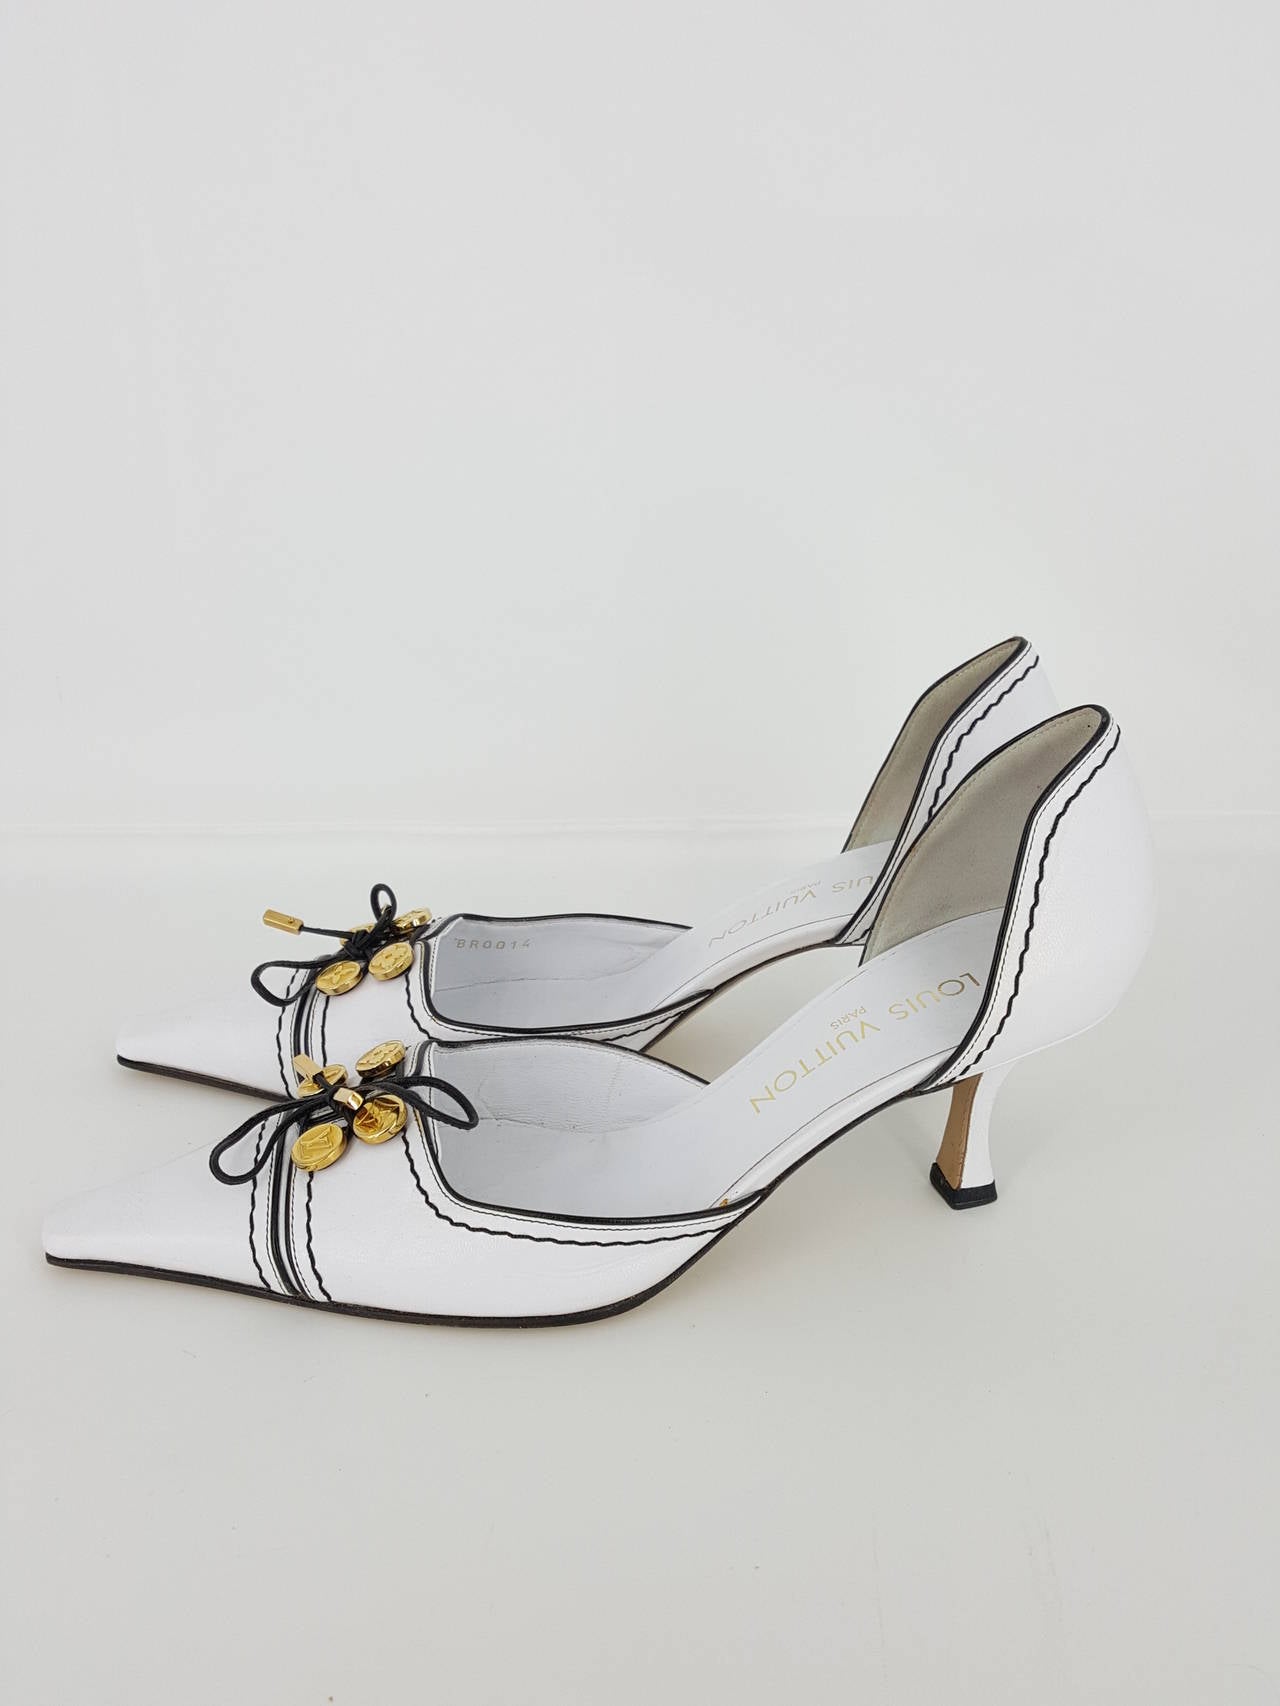 Offered for sale are these stunning Louis Vuitton white leather with black trim pumps in size 38 1/2.  The front has 4 gold logo charms and a thin black tie with gold ends.  They are cut out on the sides and have a 2 1/2